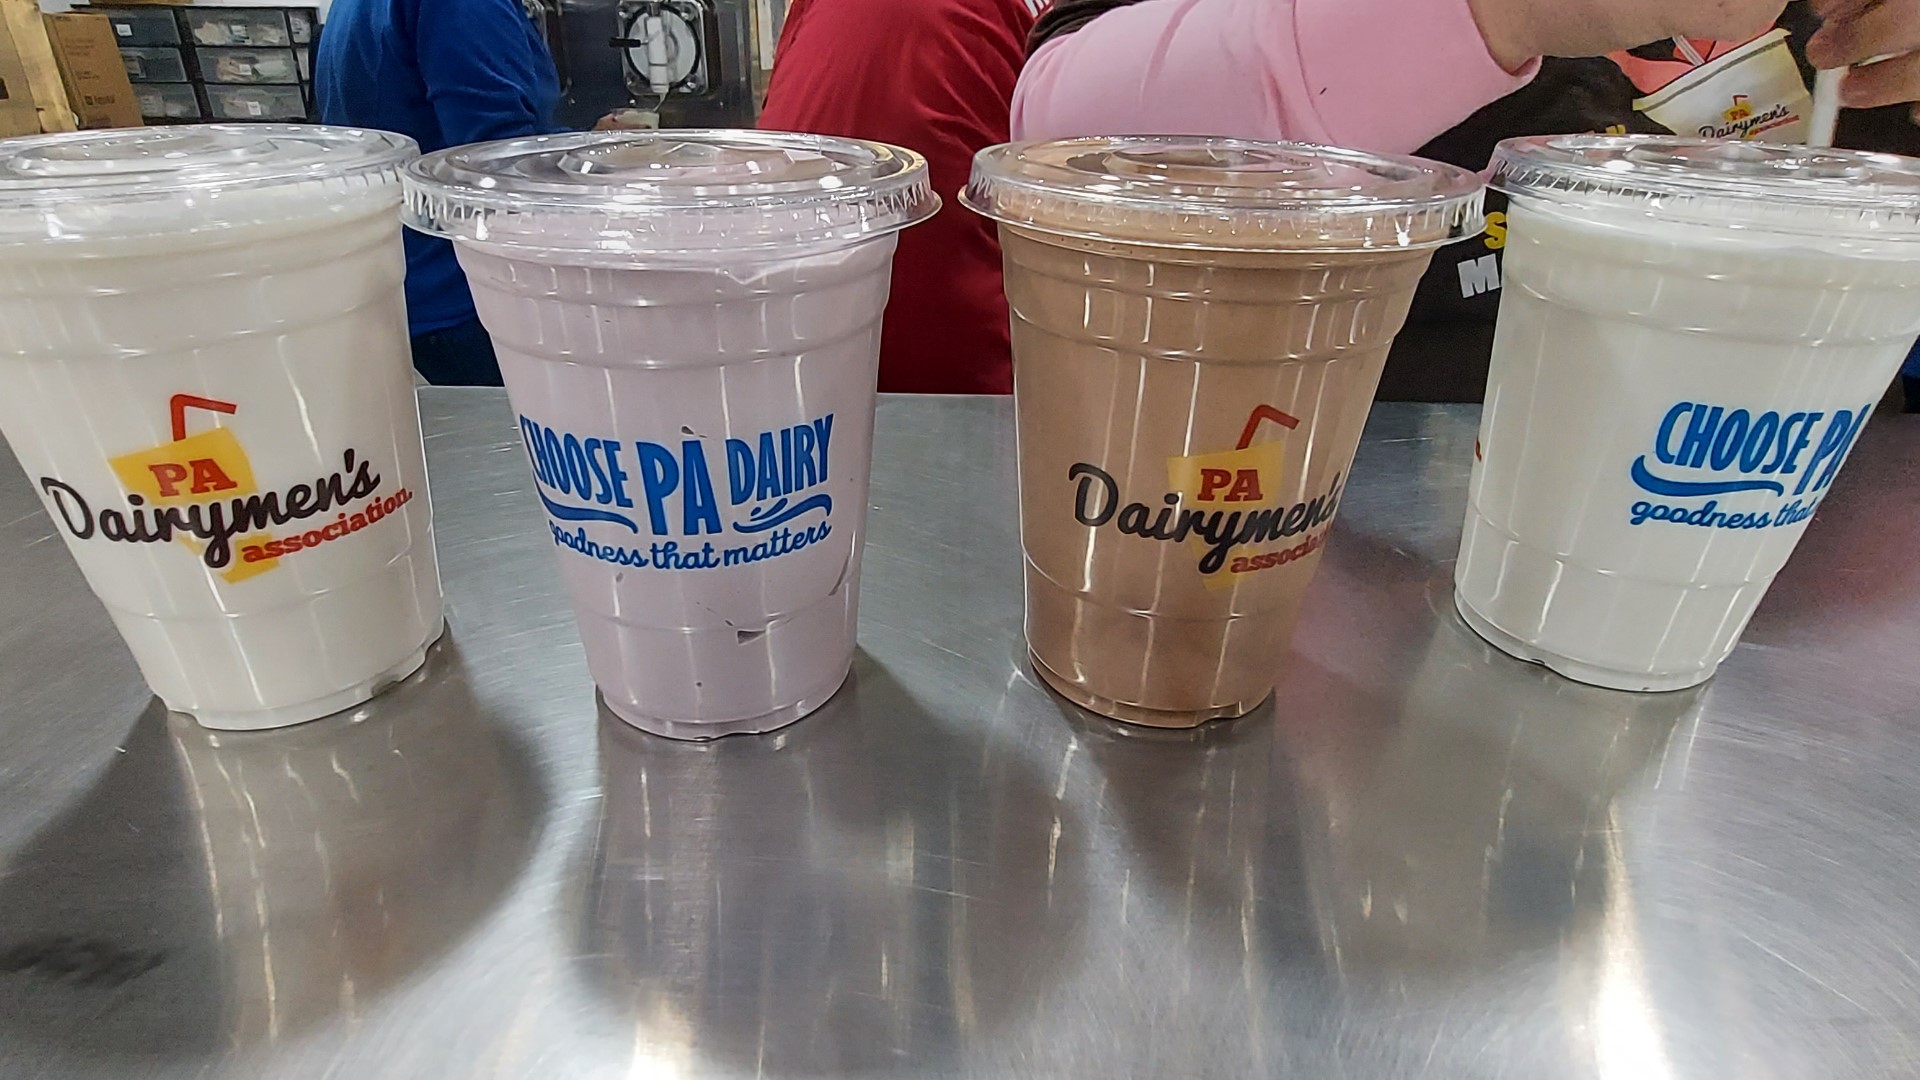 Pa. Dairymen's Association's "Milkshakes on the MOO-ve" birthday pop-ups will give free milkshakes to the first 50 customers in line.